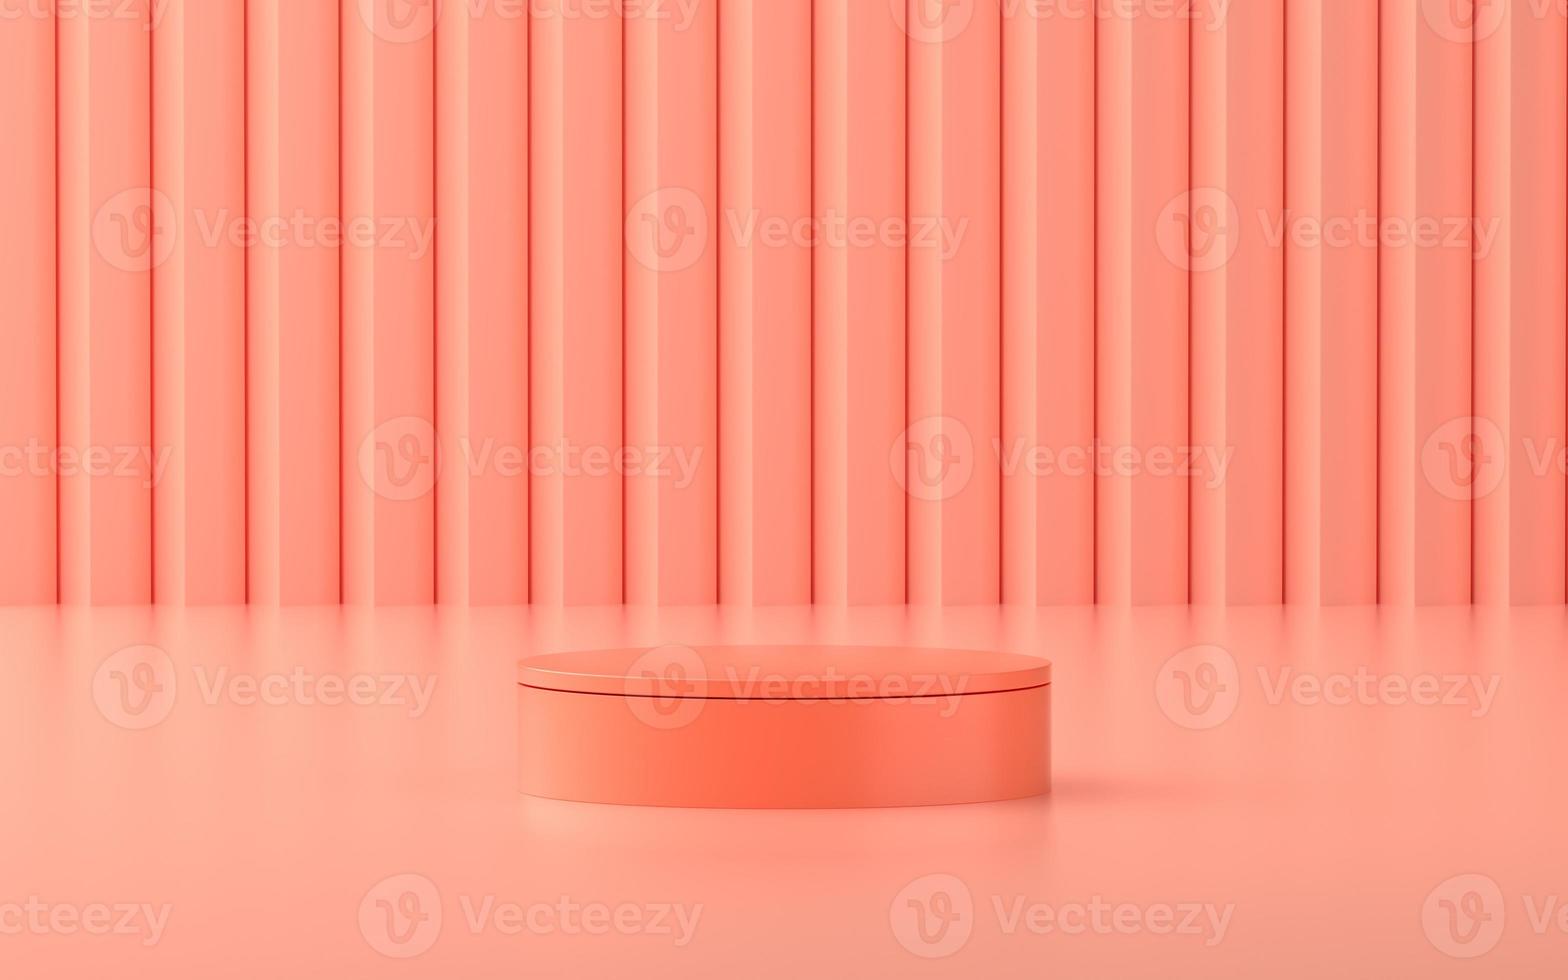 Product stage with pink scene for product promo or showcase photo